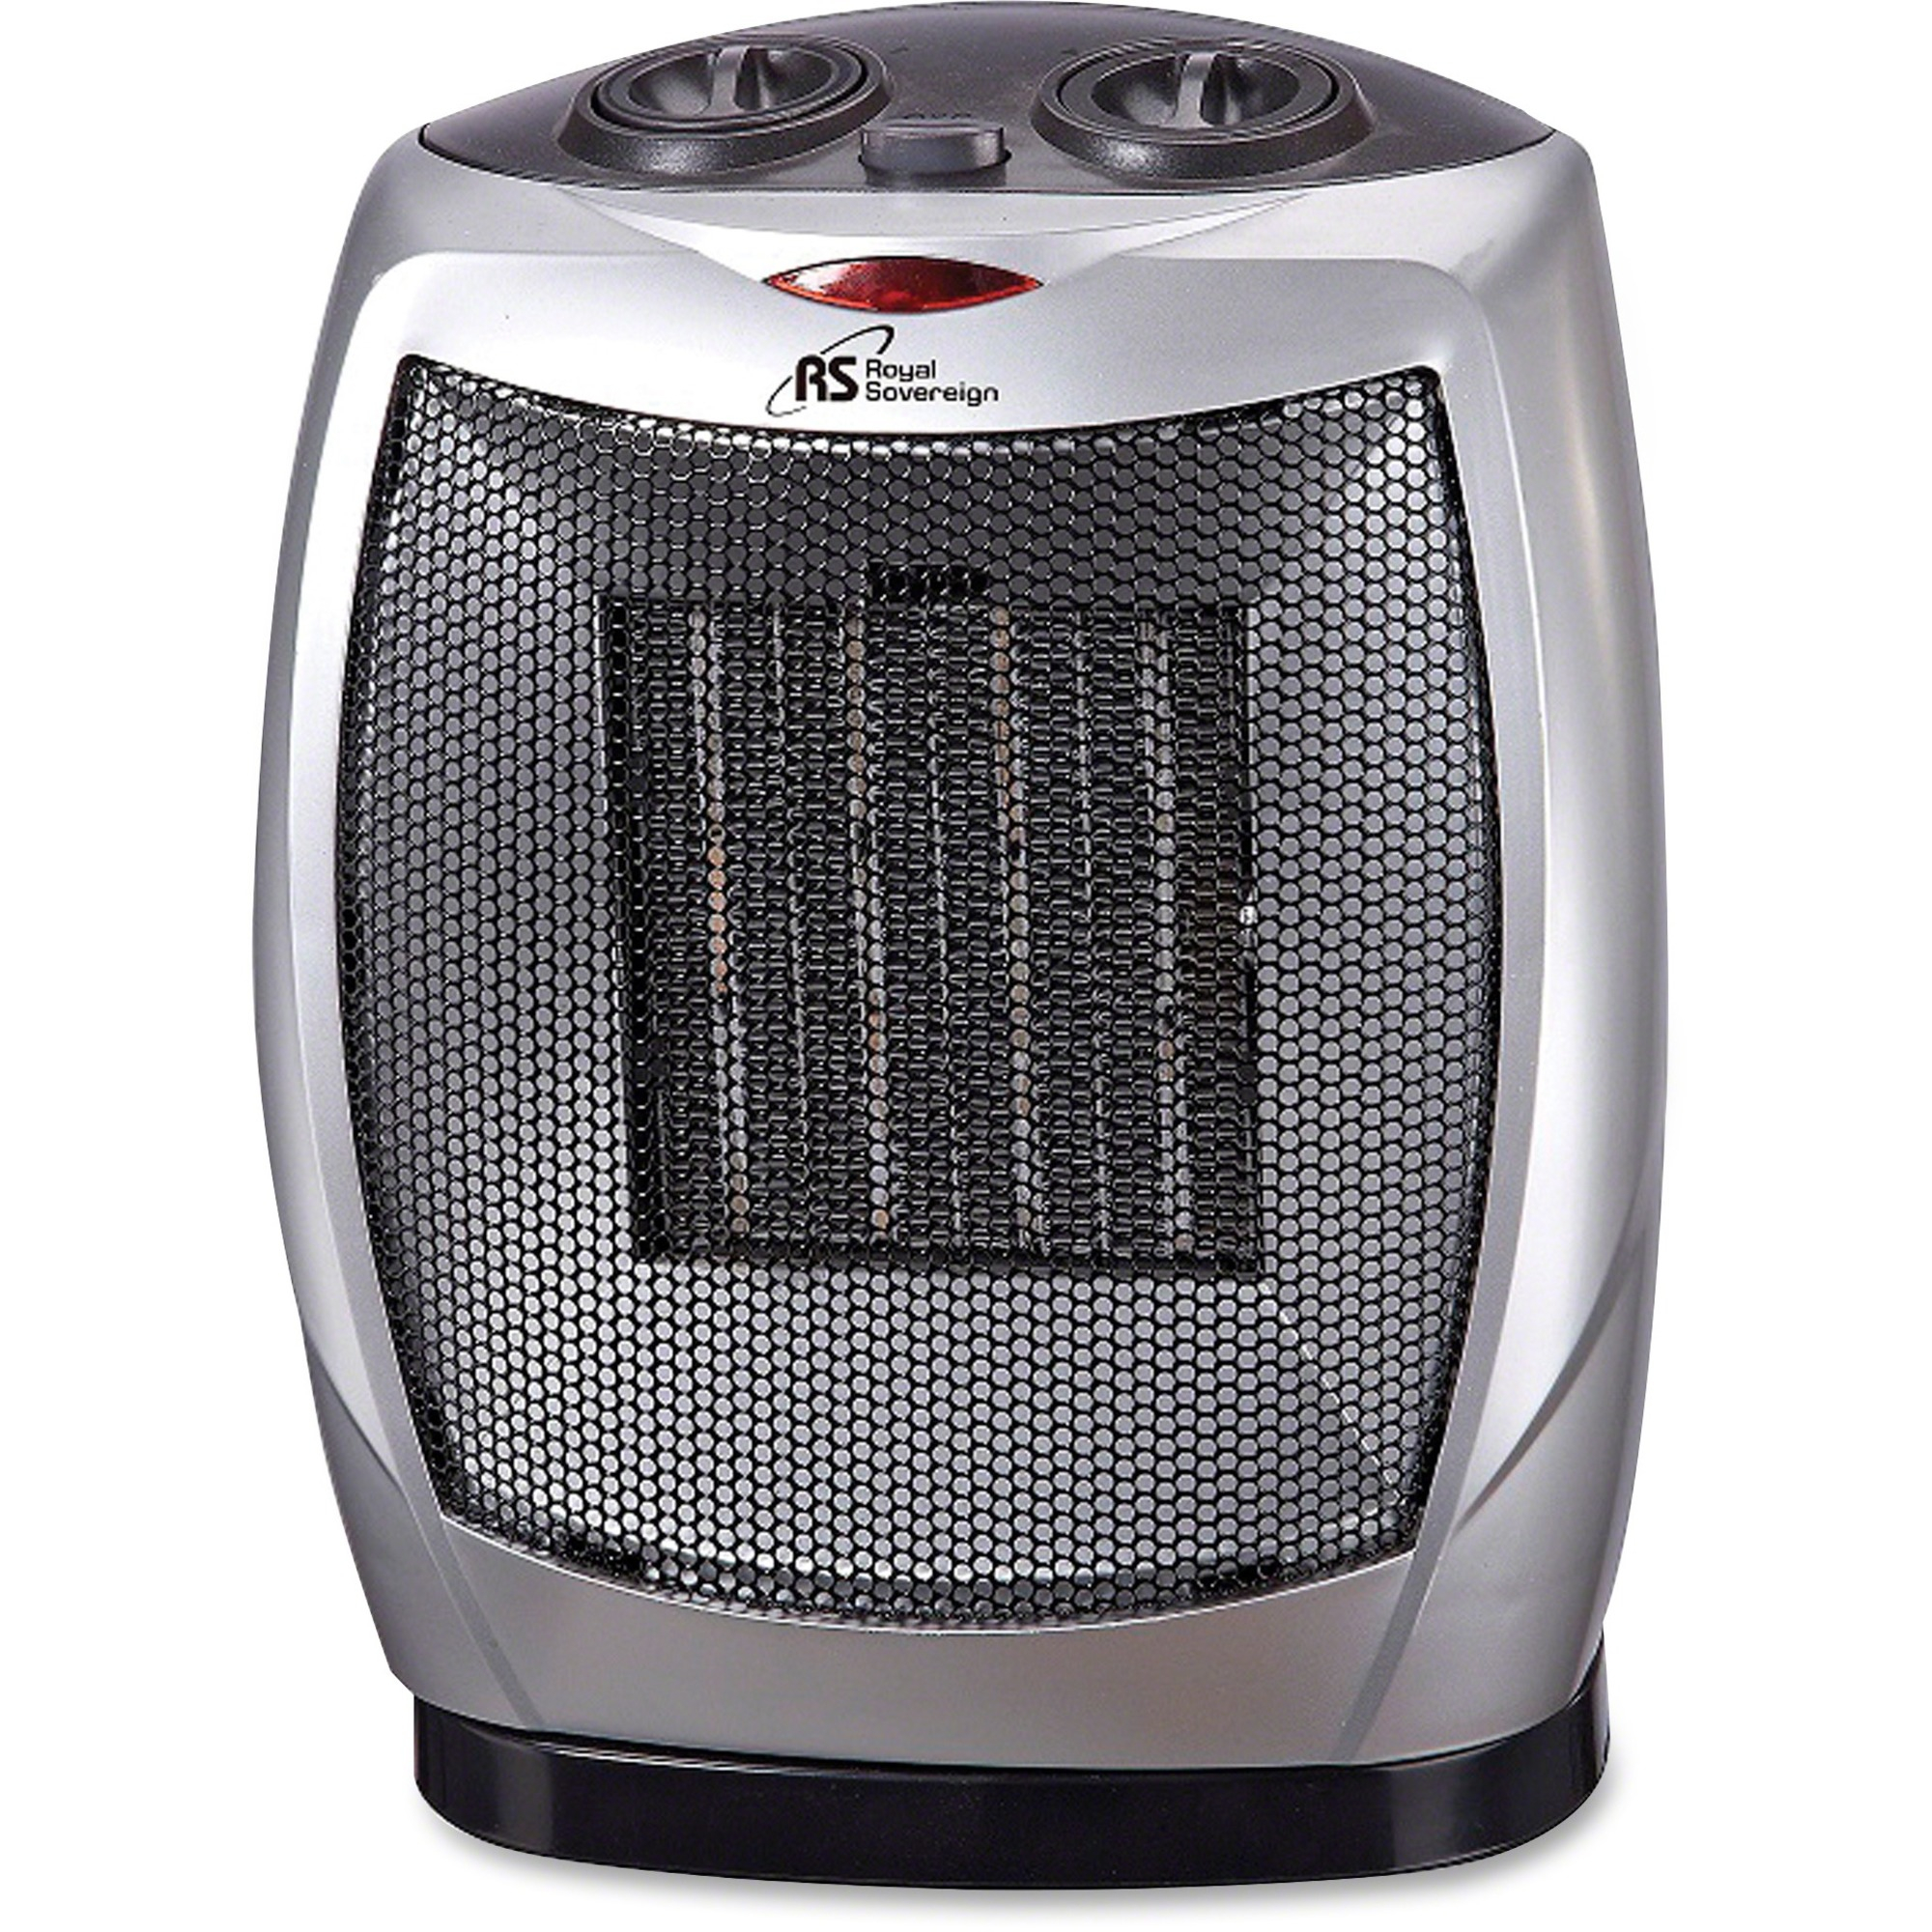 Royal Sovereign Compact Oscillating Ceramic Heater Hce 160 Ceramic Electric 750 W To 150 Kw 2 X Heat Settings Portable Desk Floor for size 2000 X 2000